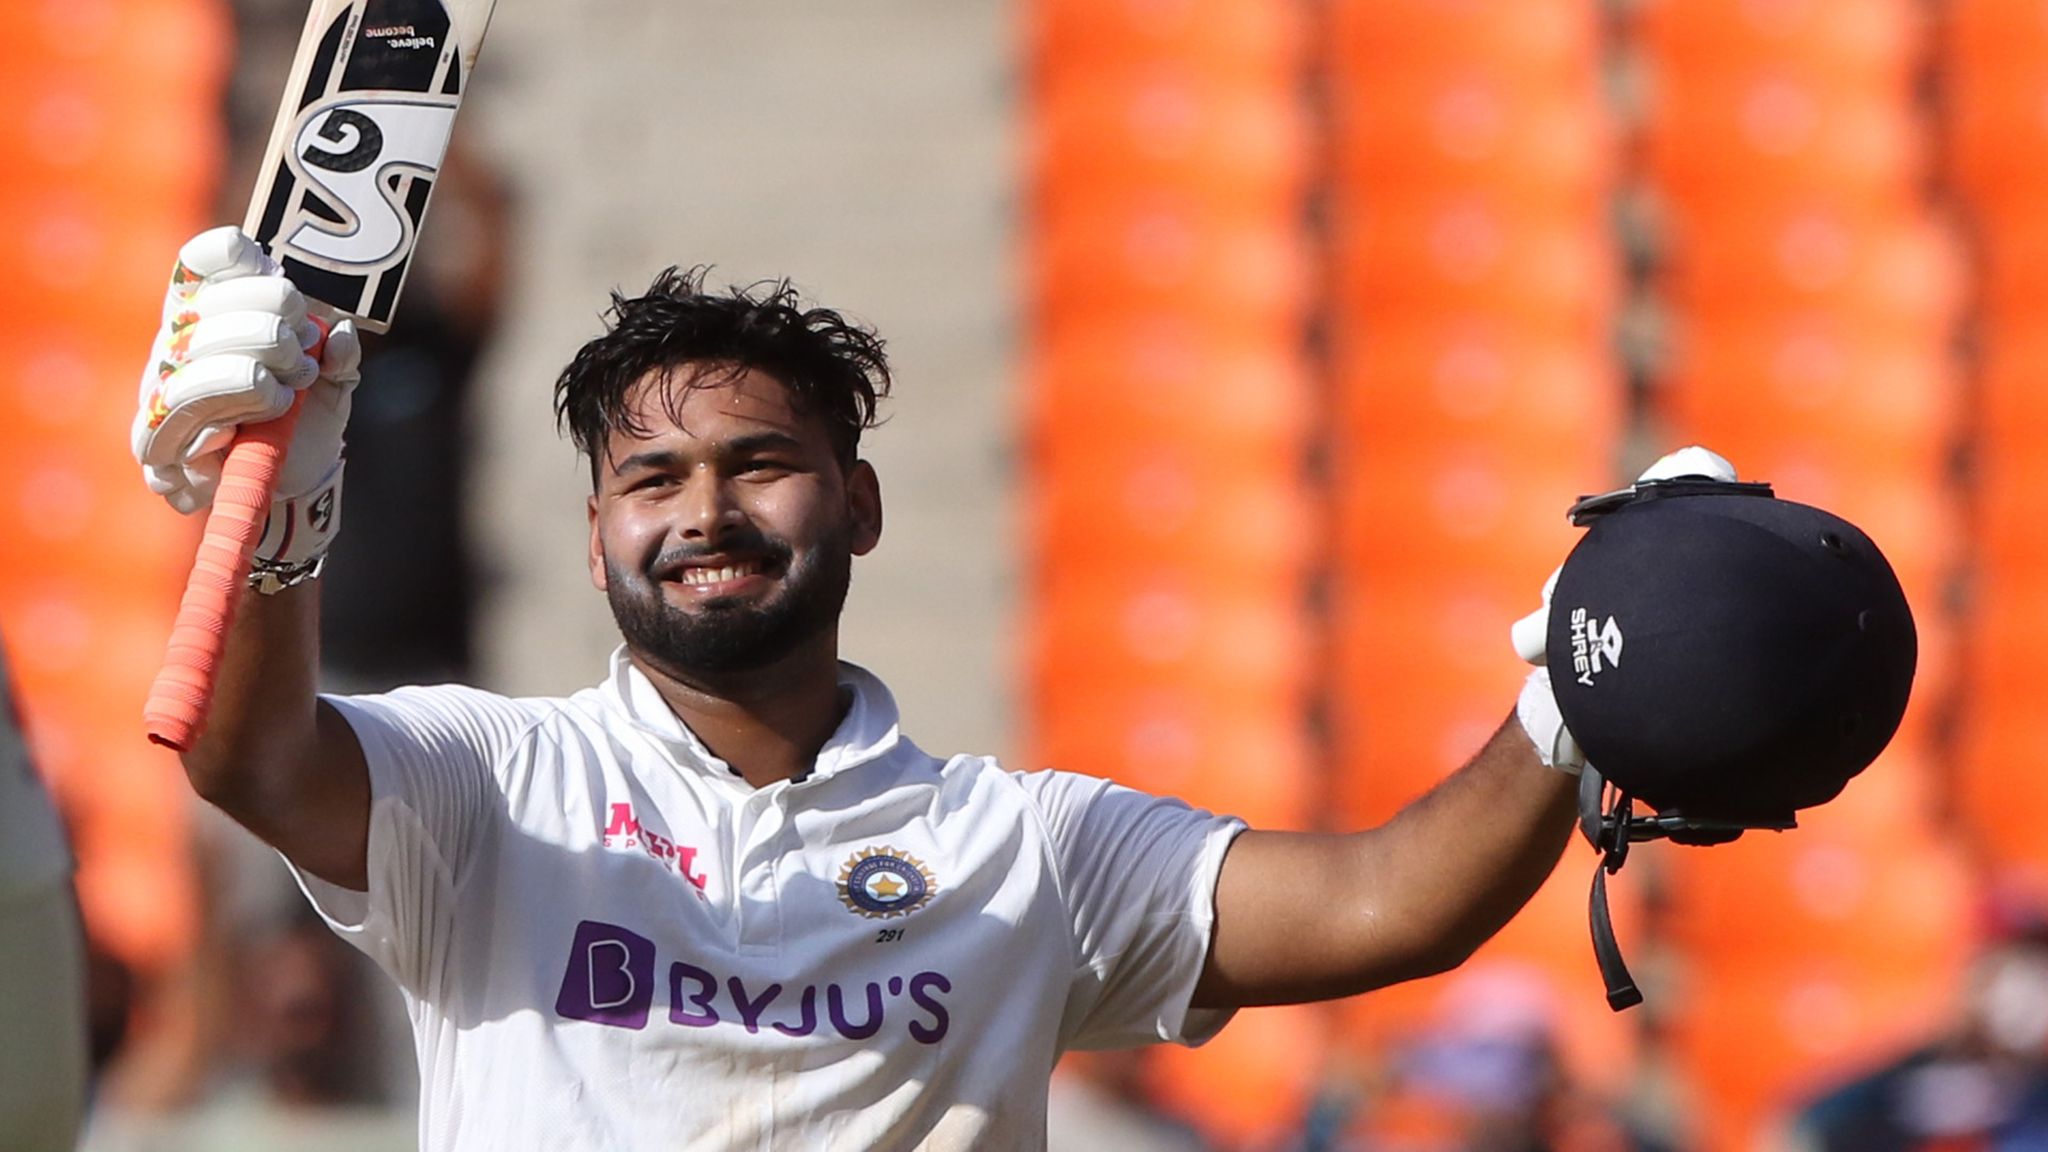 Rishabh Pant smashed his 3rd Test ton helping India win the 4th Test | Sky Sports